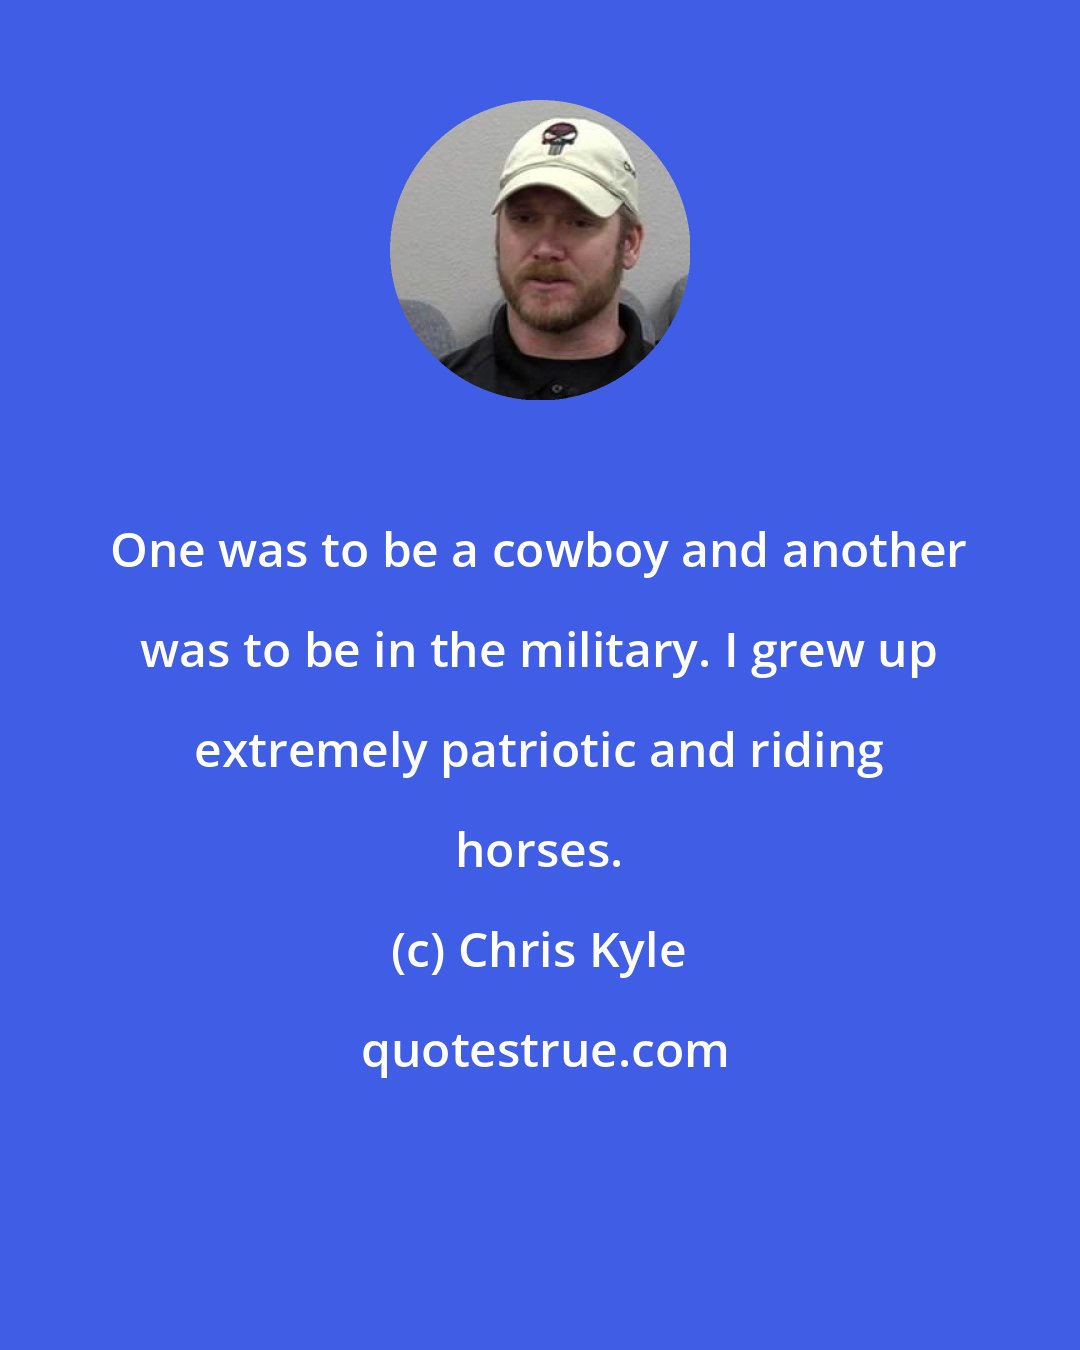 Chris Kyle: One was to be a cowboy and another was to be in the military. I grew up extremely patriotic and riding horses.